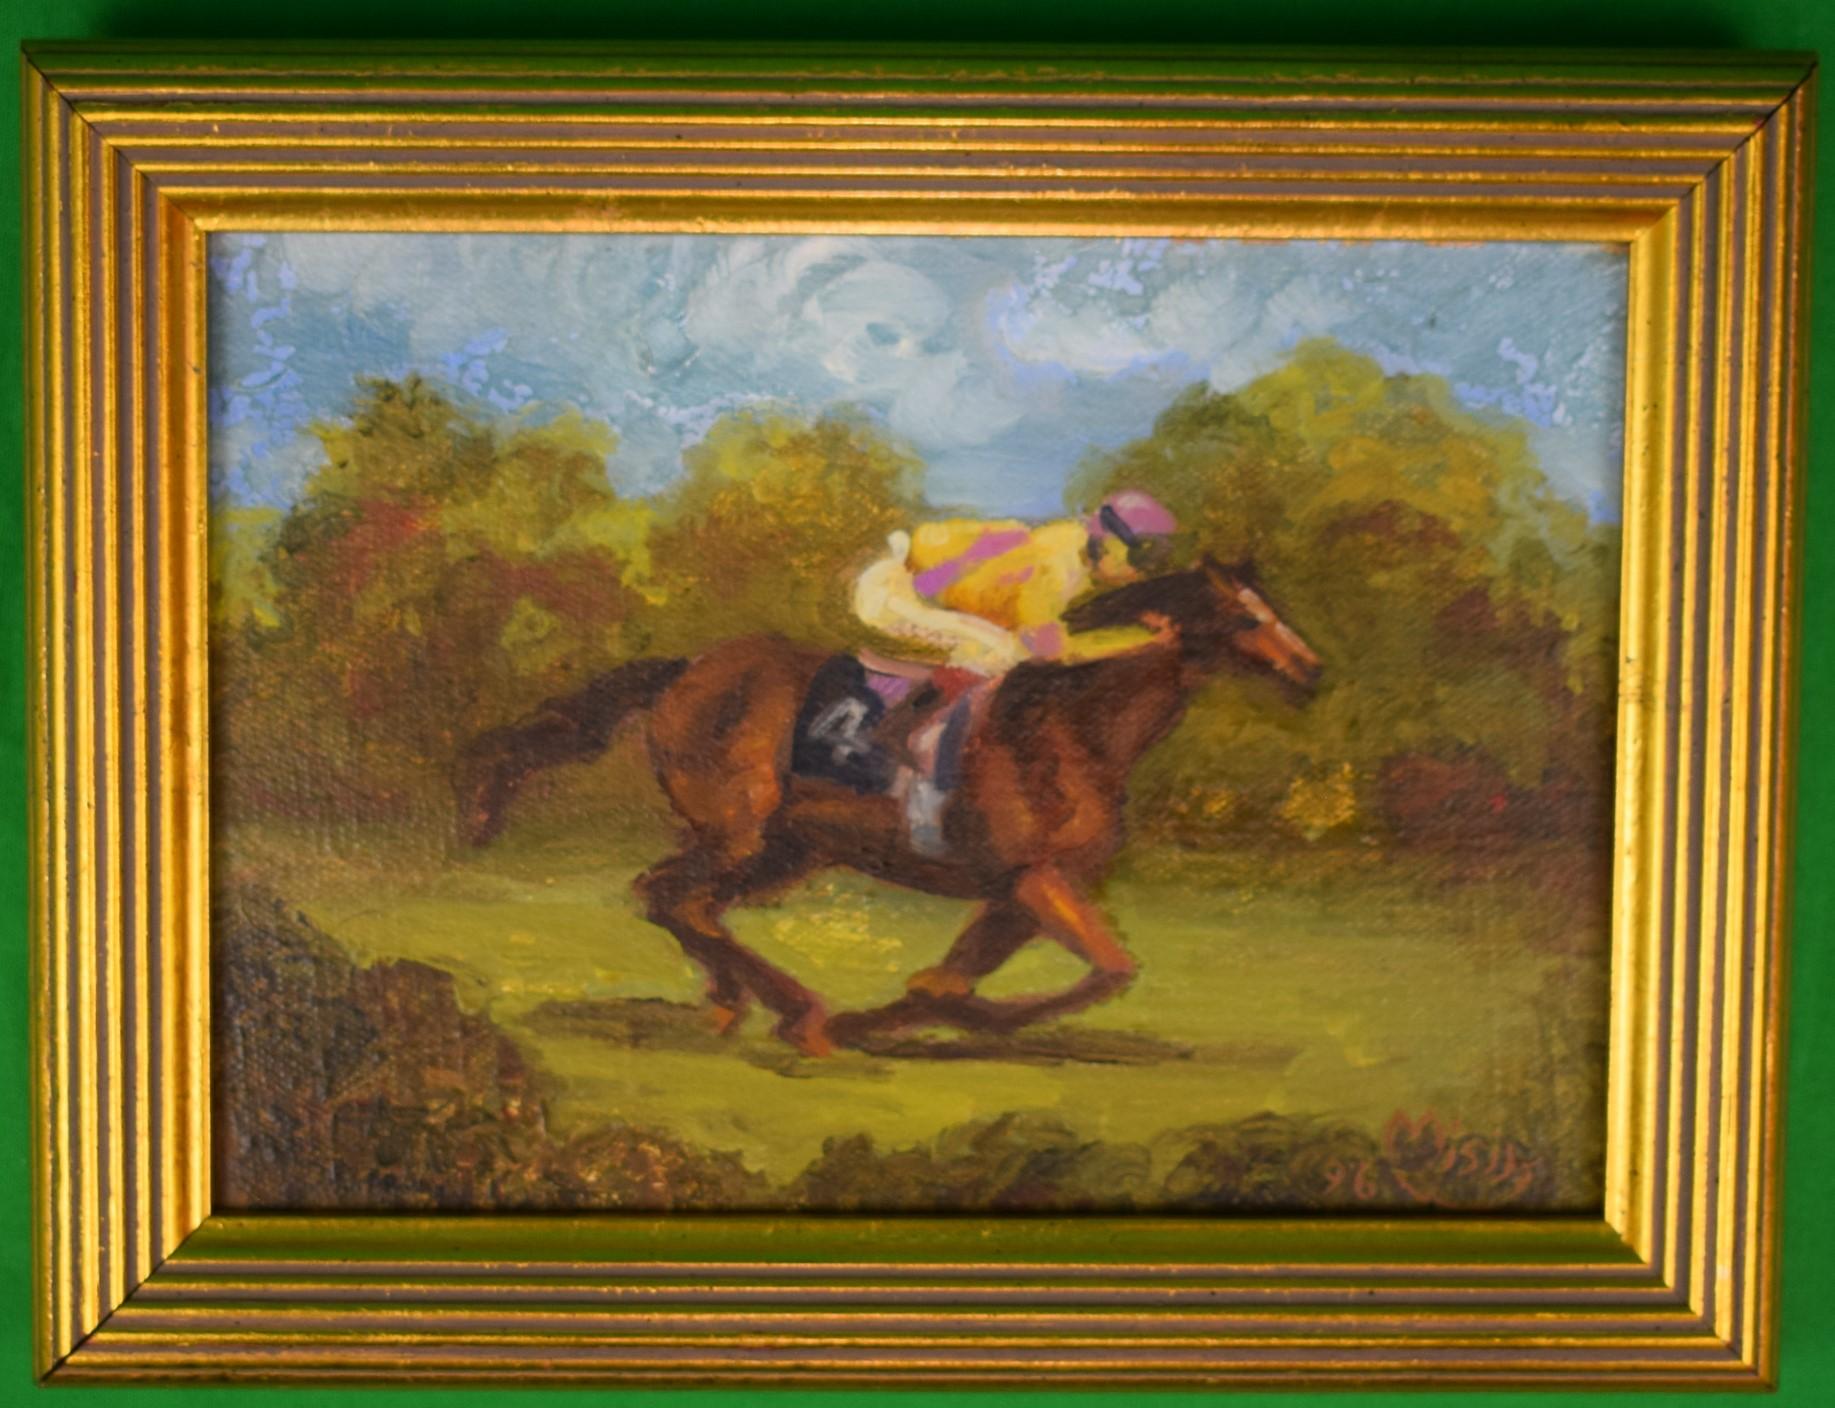 Art Sz: 4 3/4"H x 6 3/4"W

Frame Sz: 6 1/2"H x 8 5/8"W

w/ Misia Broadhead Studio Middleburg, VA label on verso

MISIA BROADHEAD was born in Washington D.C. and grew up in Italy, in Rome and Tuscany. Italy was a great source of inspiration for her